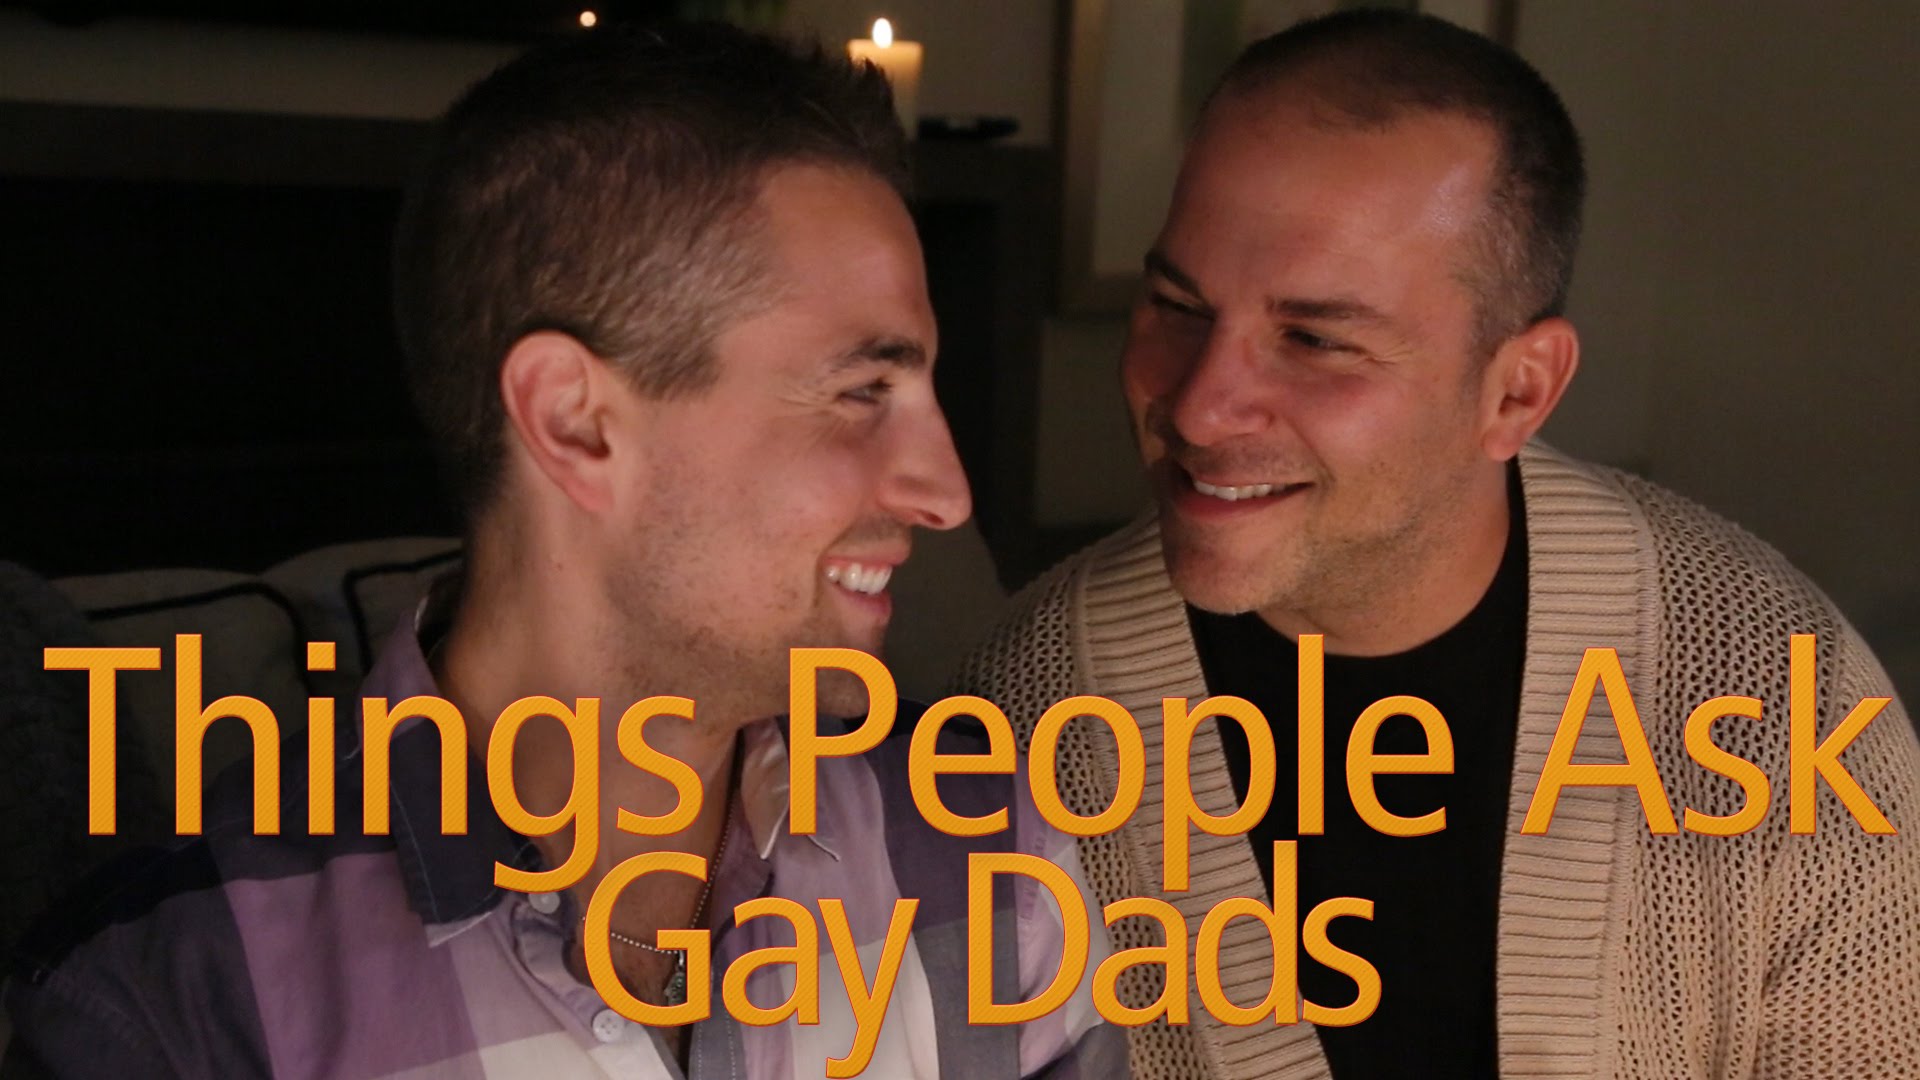  Gays With Kids Celebrates Father’s Day with “Things People Ask Gay Dads” video  and “Gay, Out and Daddy” e-Book